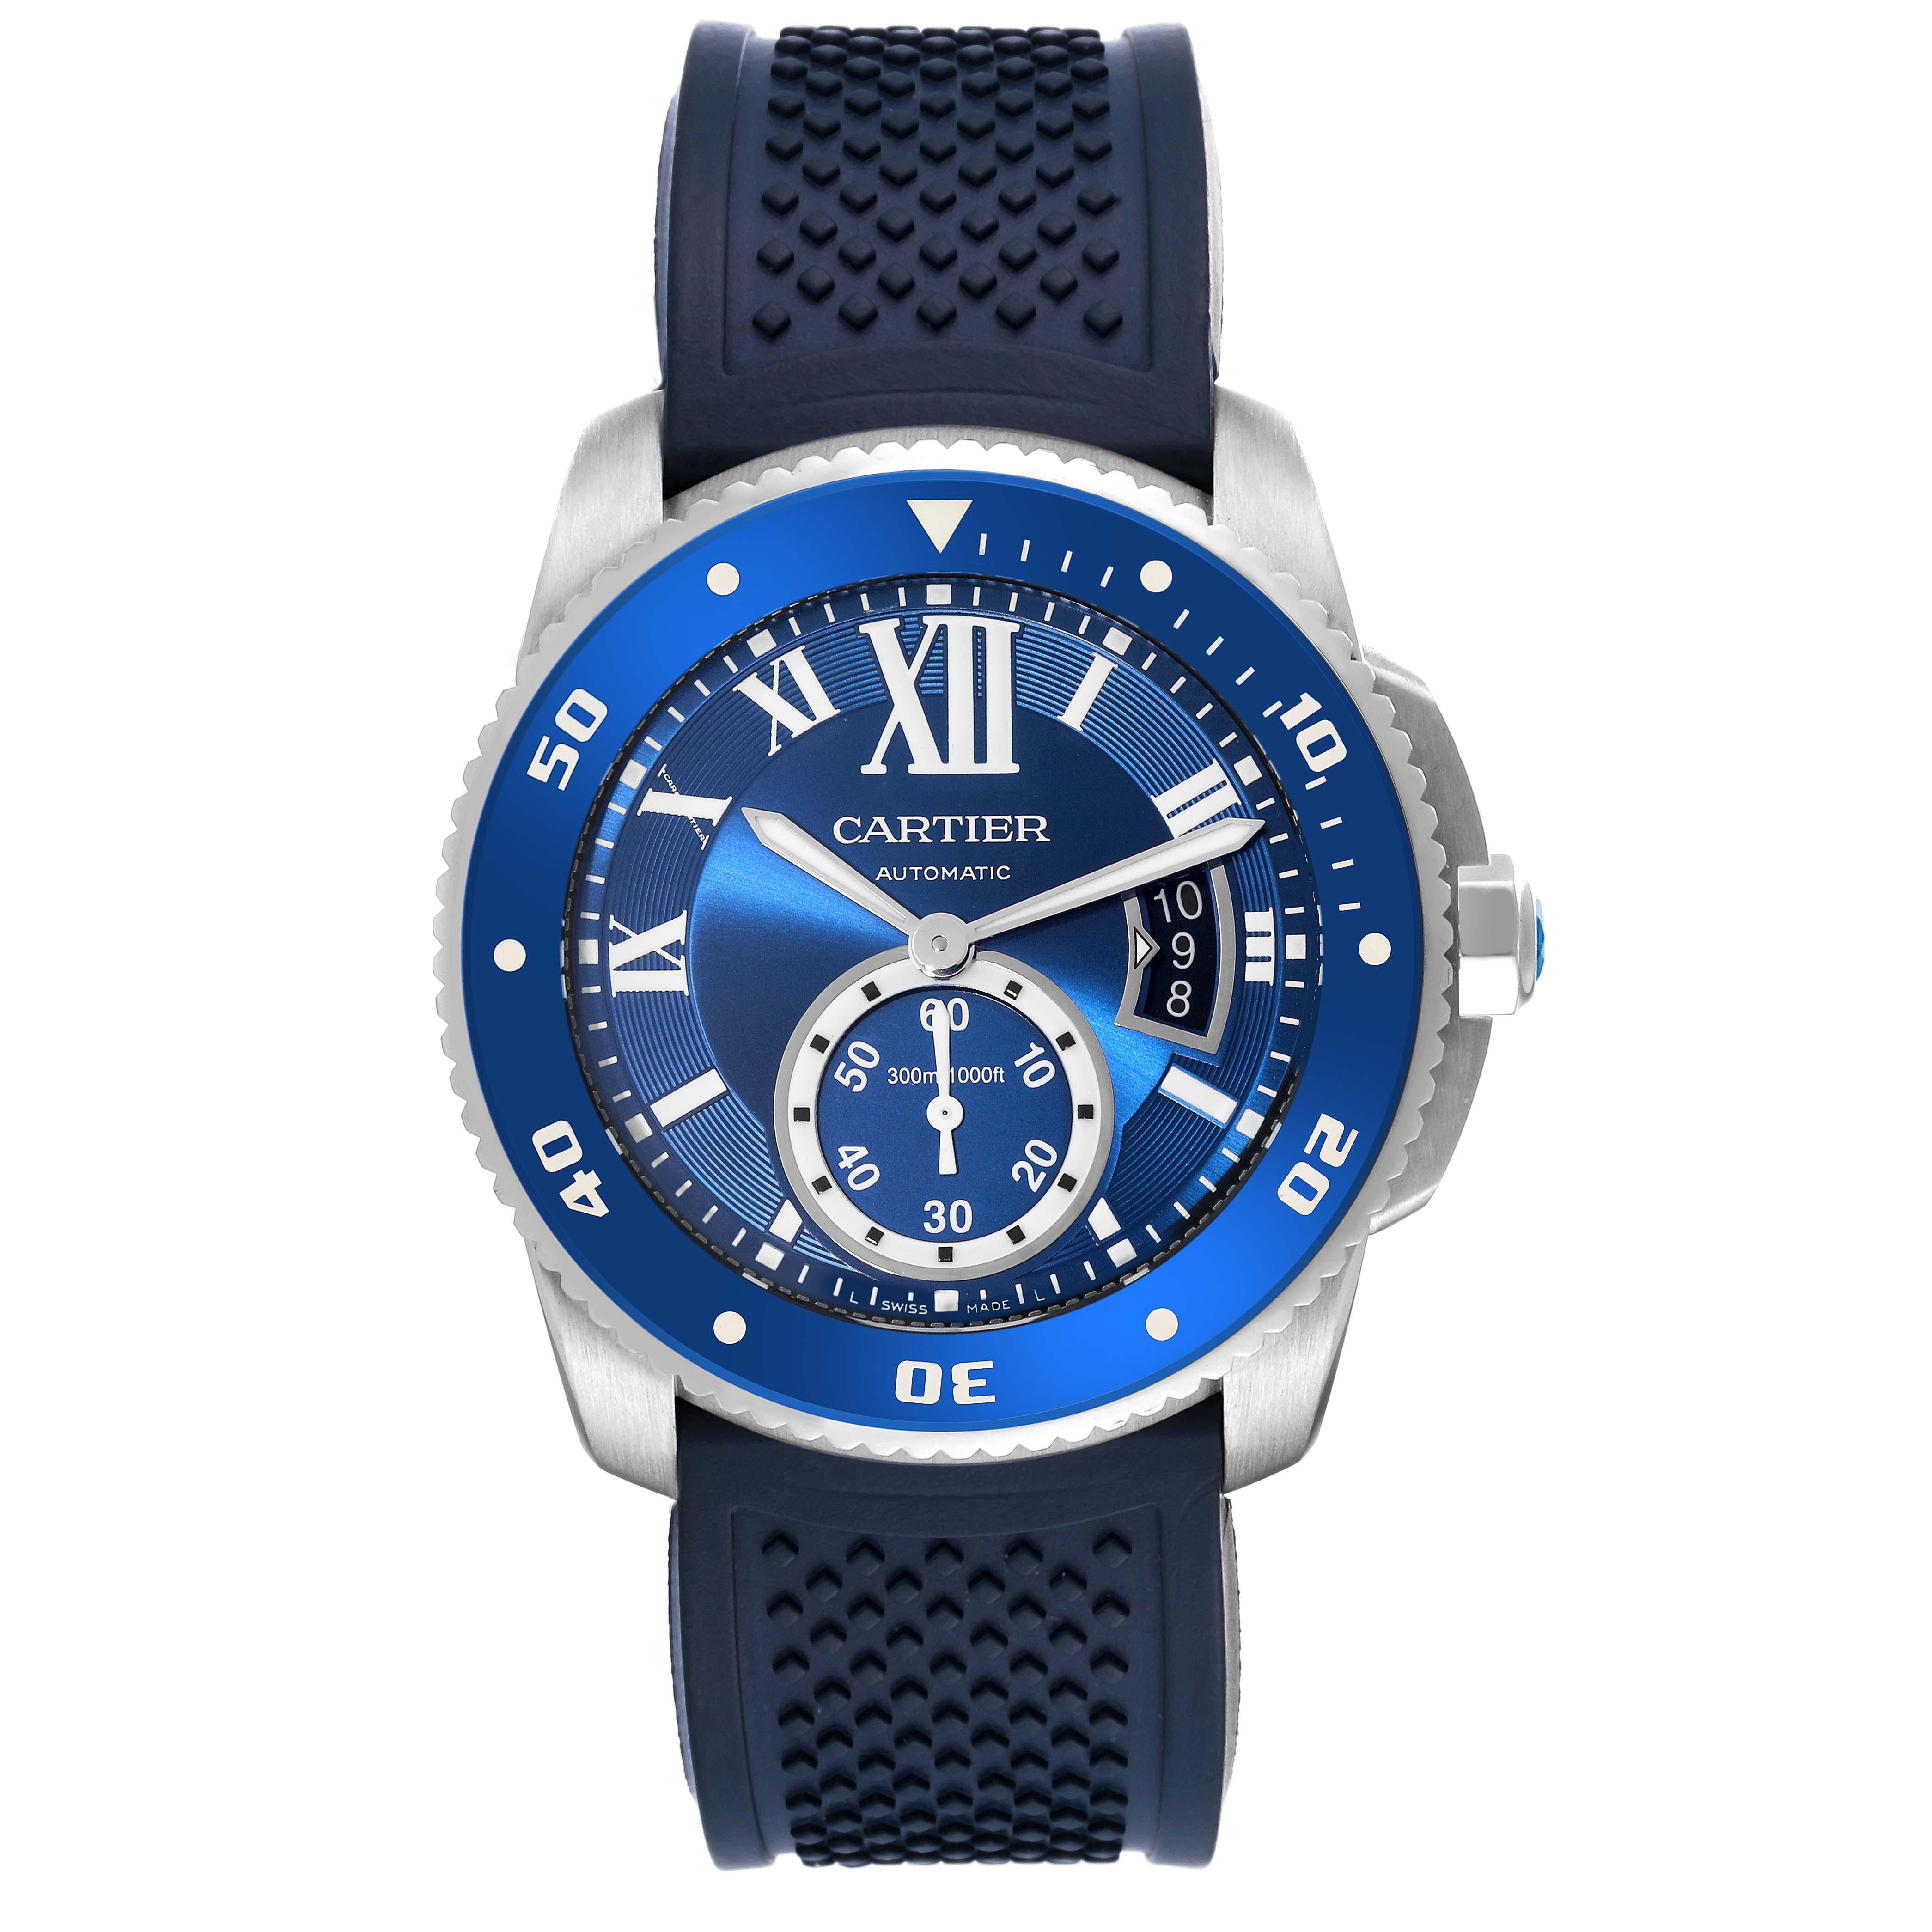 Cartier Calibre Diver Blue Dial Steel Mens Watch WSCA0010 Papers. Automatic self-winding movement. Stainless steel round case 42.0 mm in diameter. Crown set with faceted blue spinel. Case thickness: 11 mm. Blue ADLC-coated stainless steel